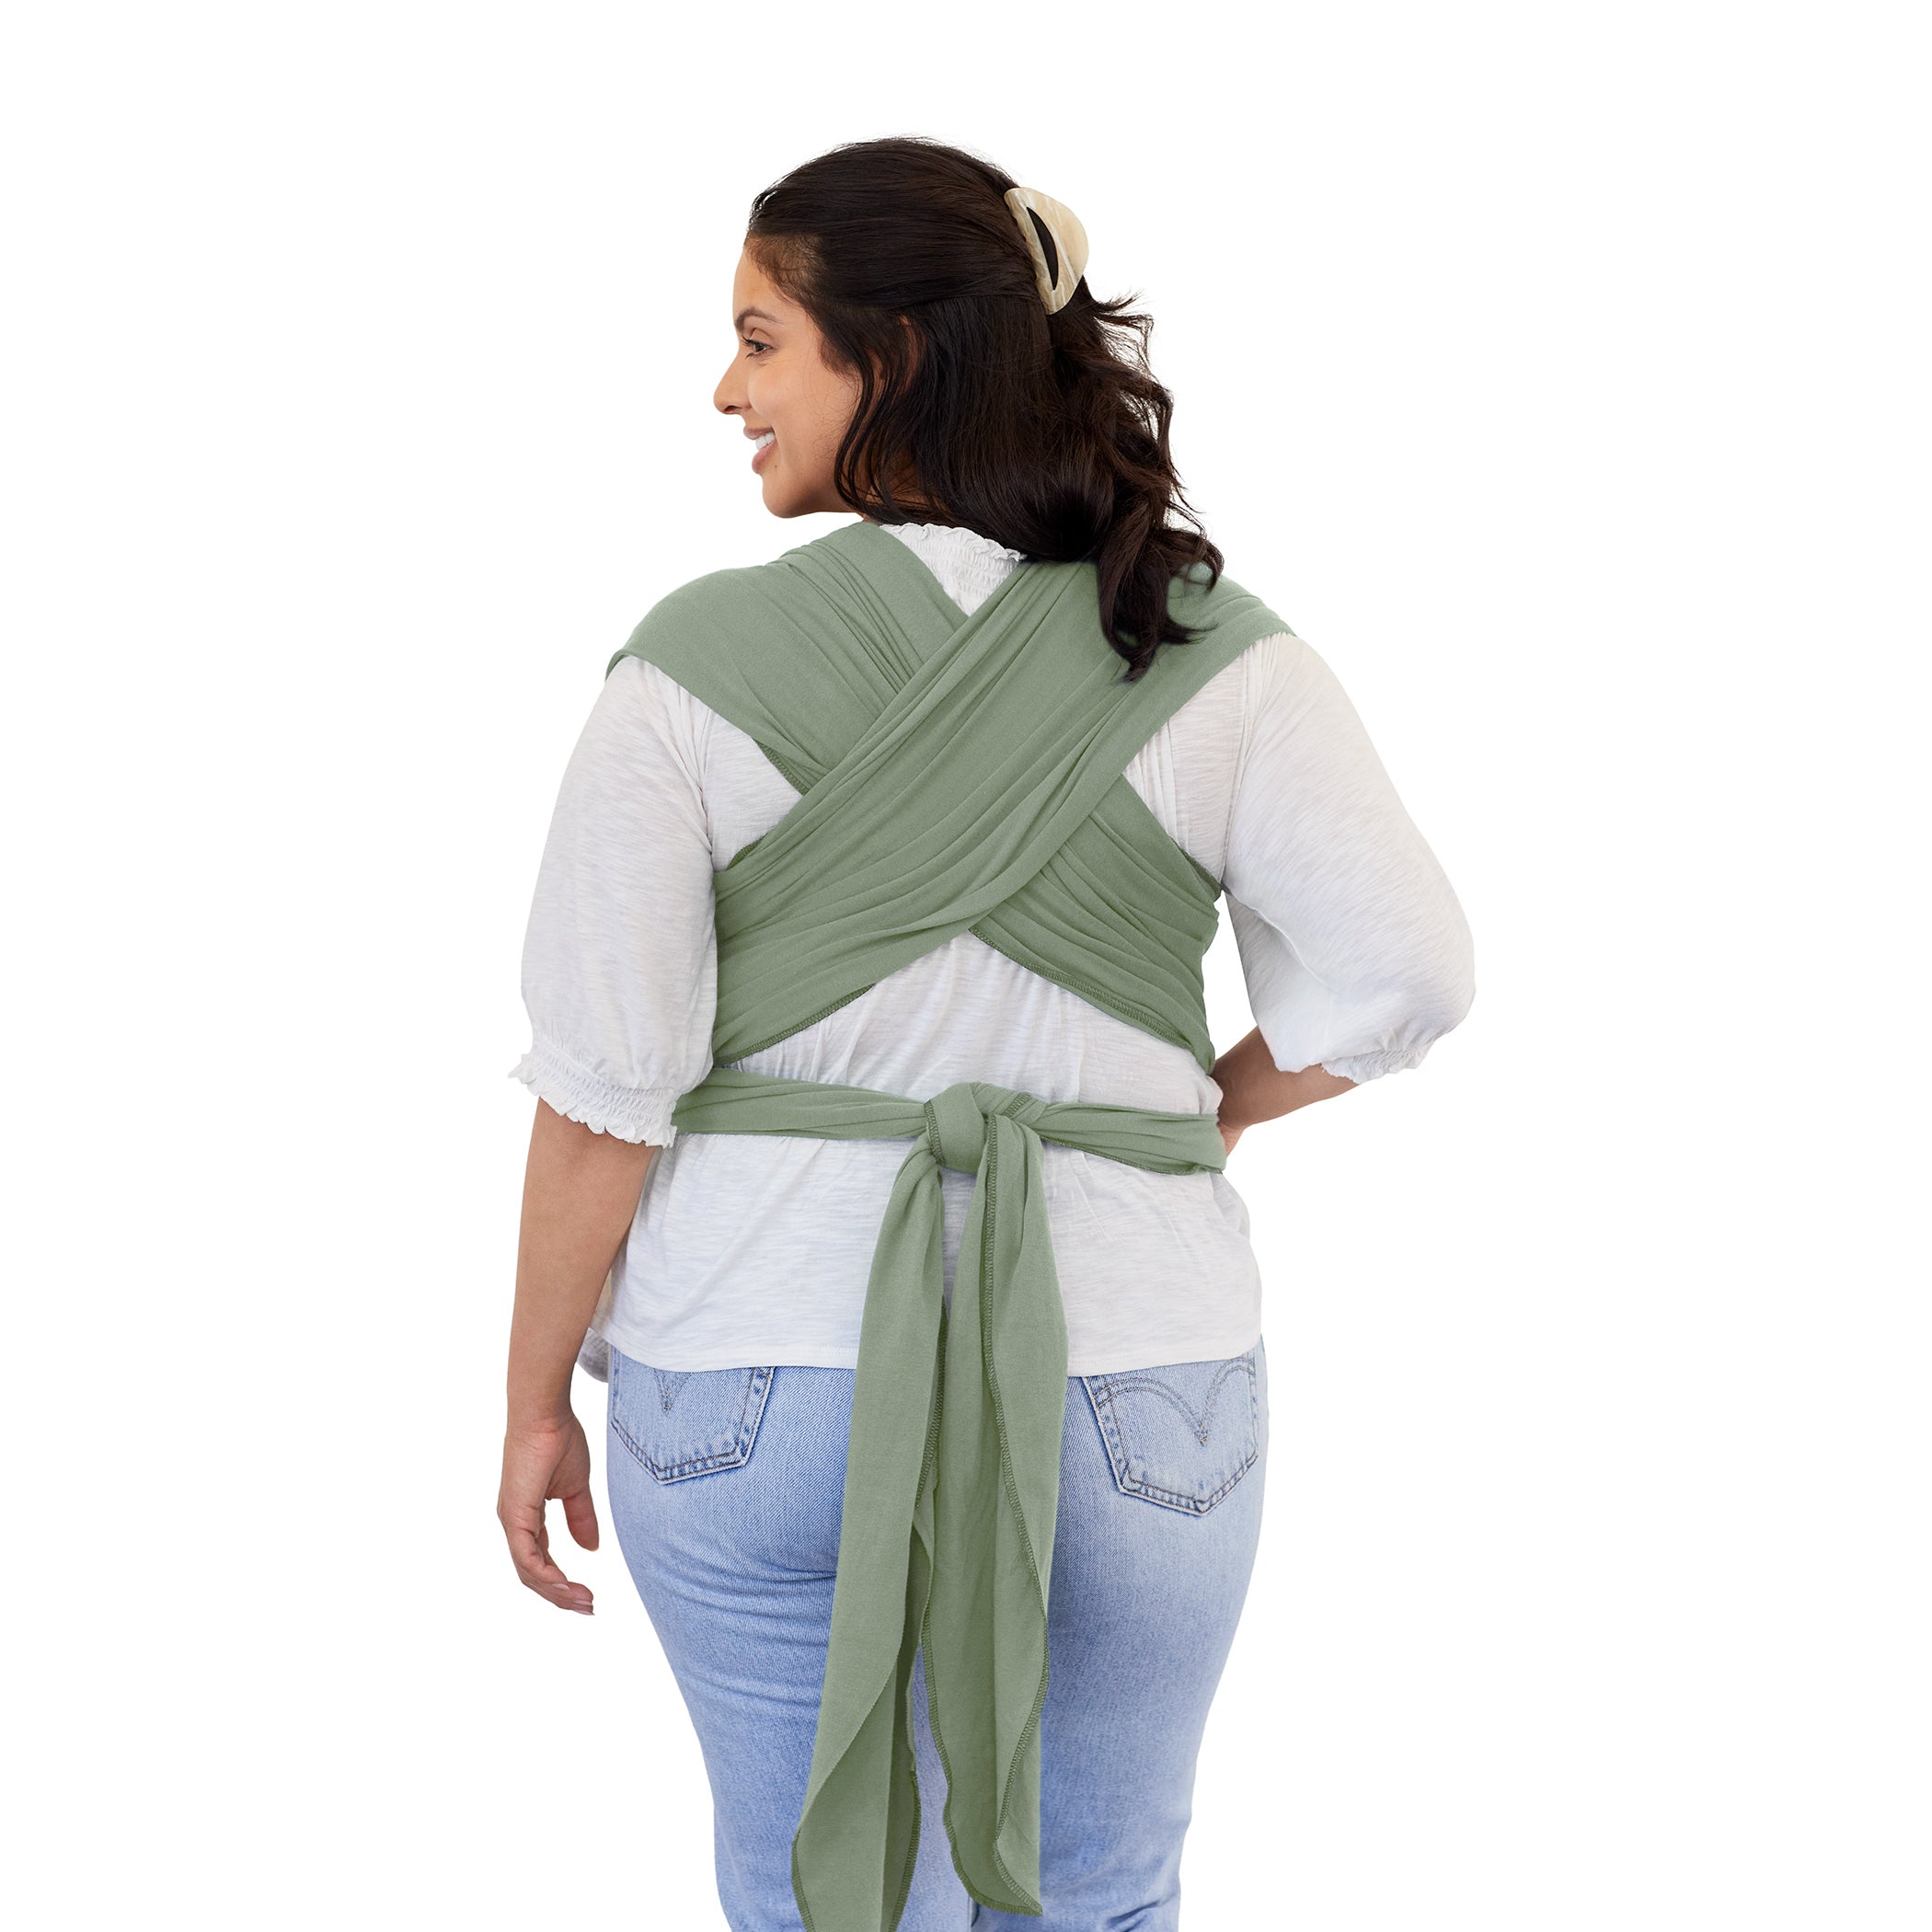 Back image of Mom wearing baby in Moby Classic Wrap Baby Carrier in Pear